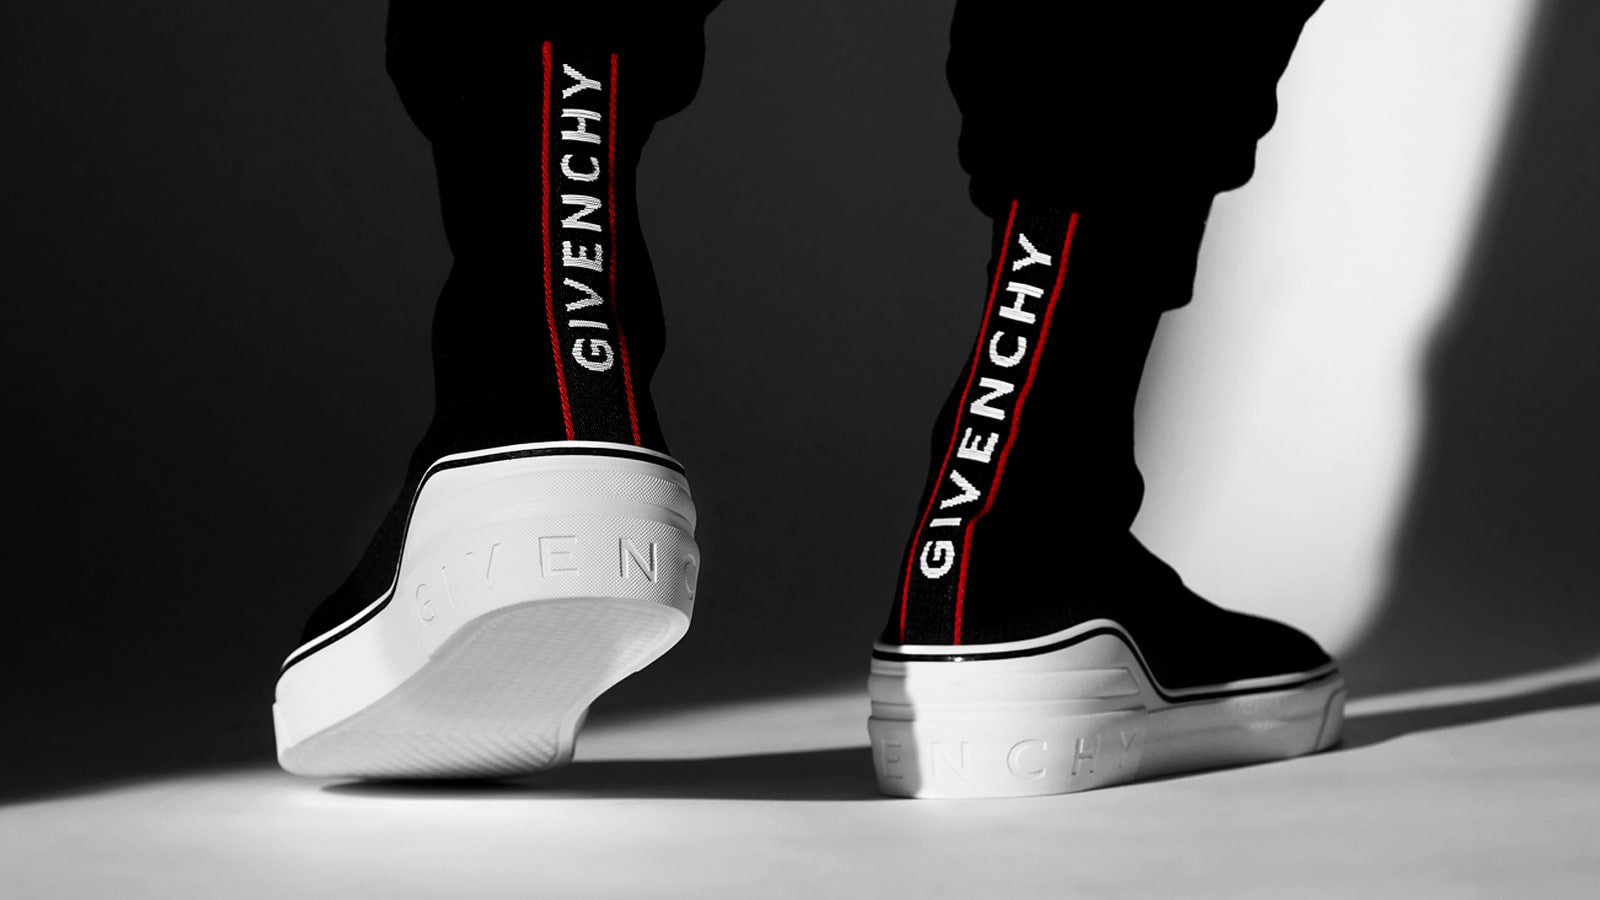 givenchy george v mid sock sneaker